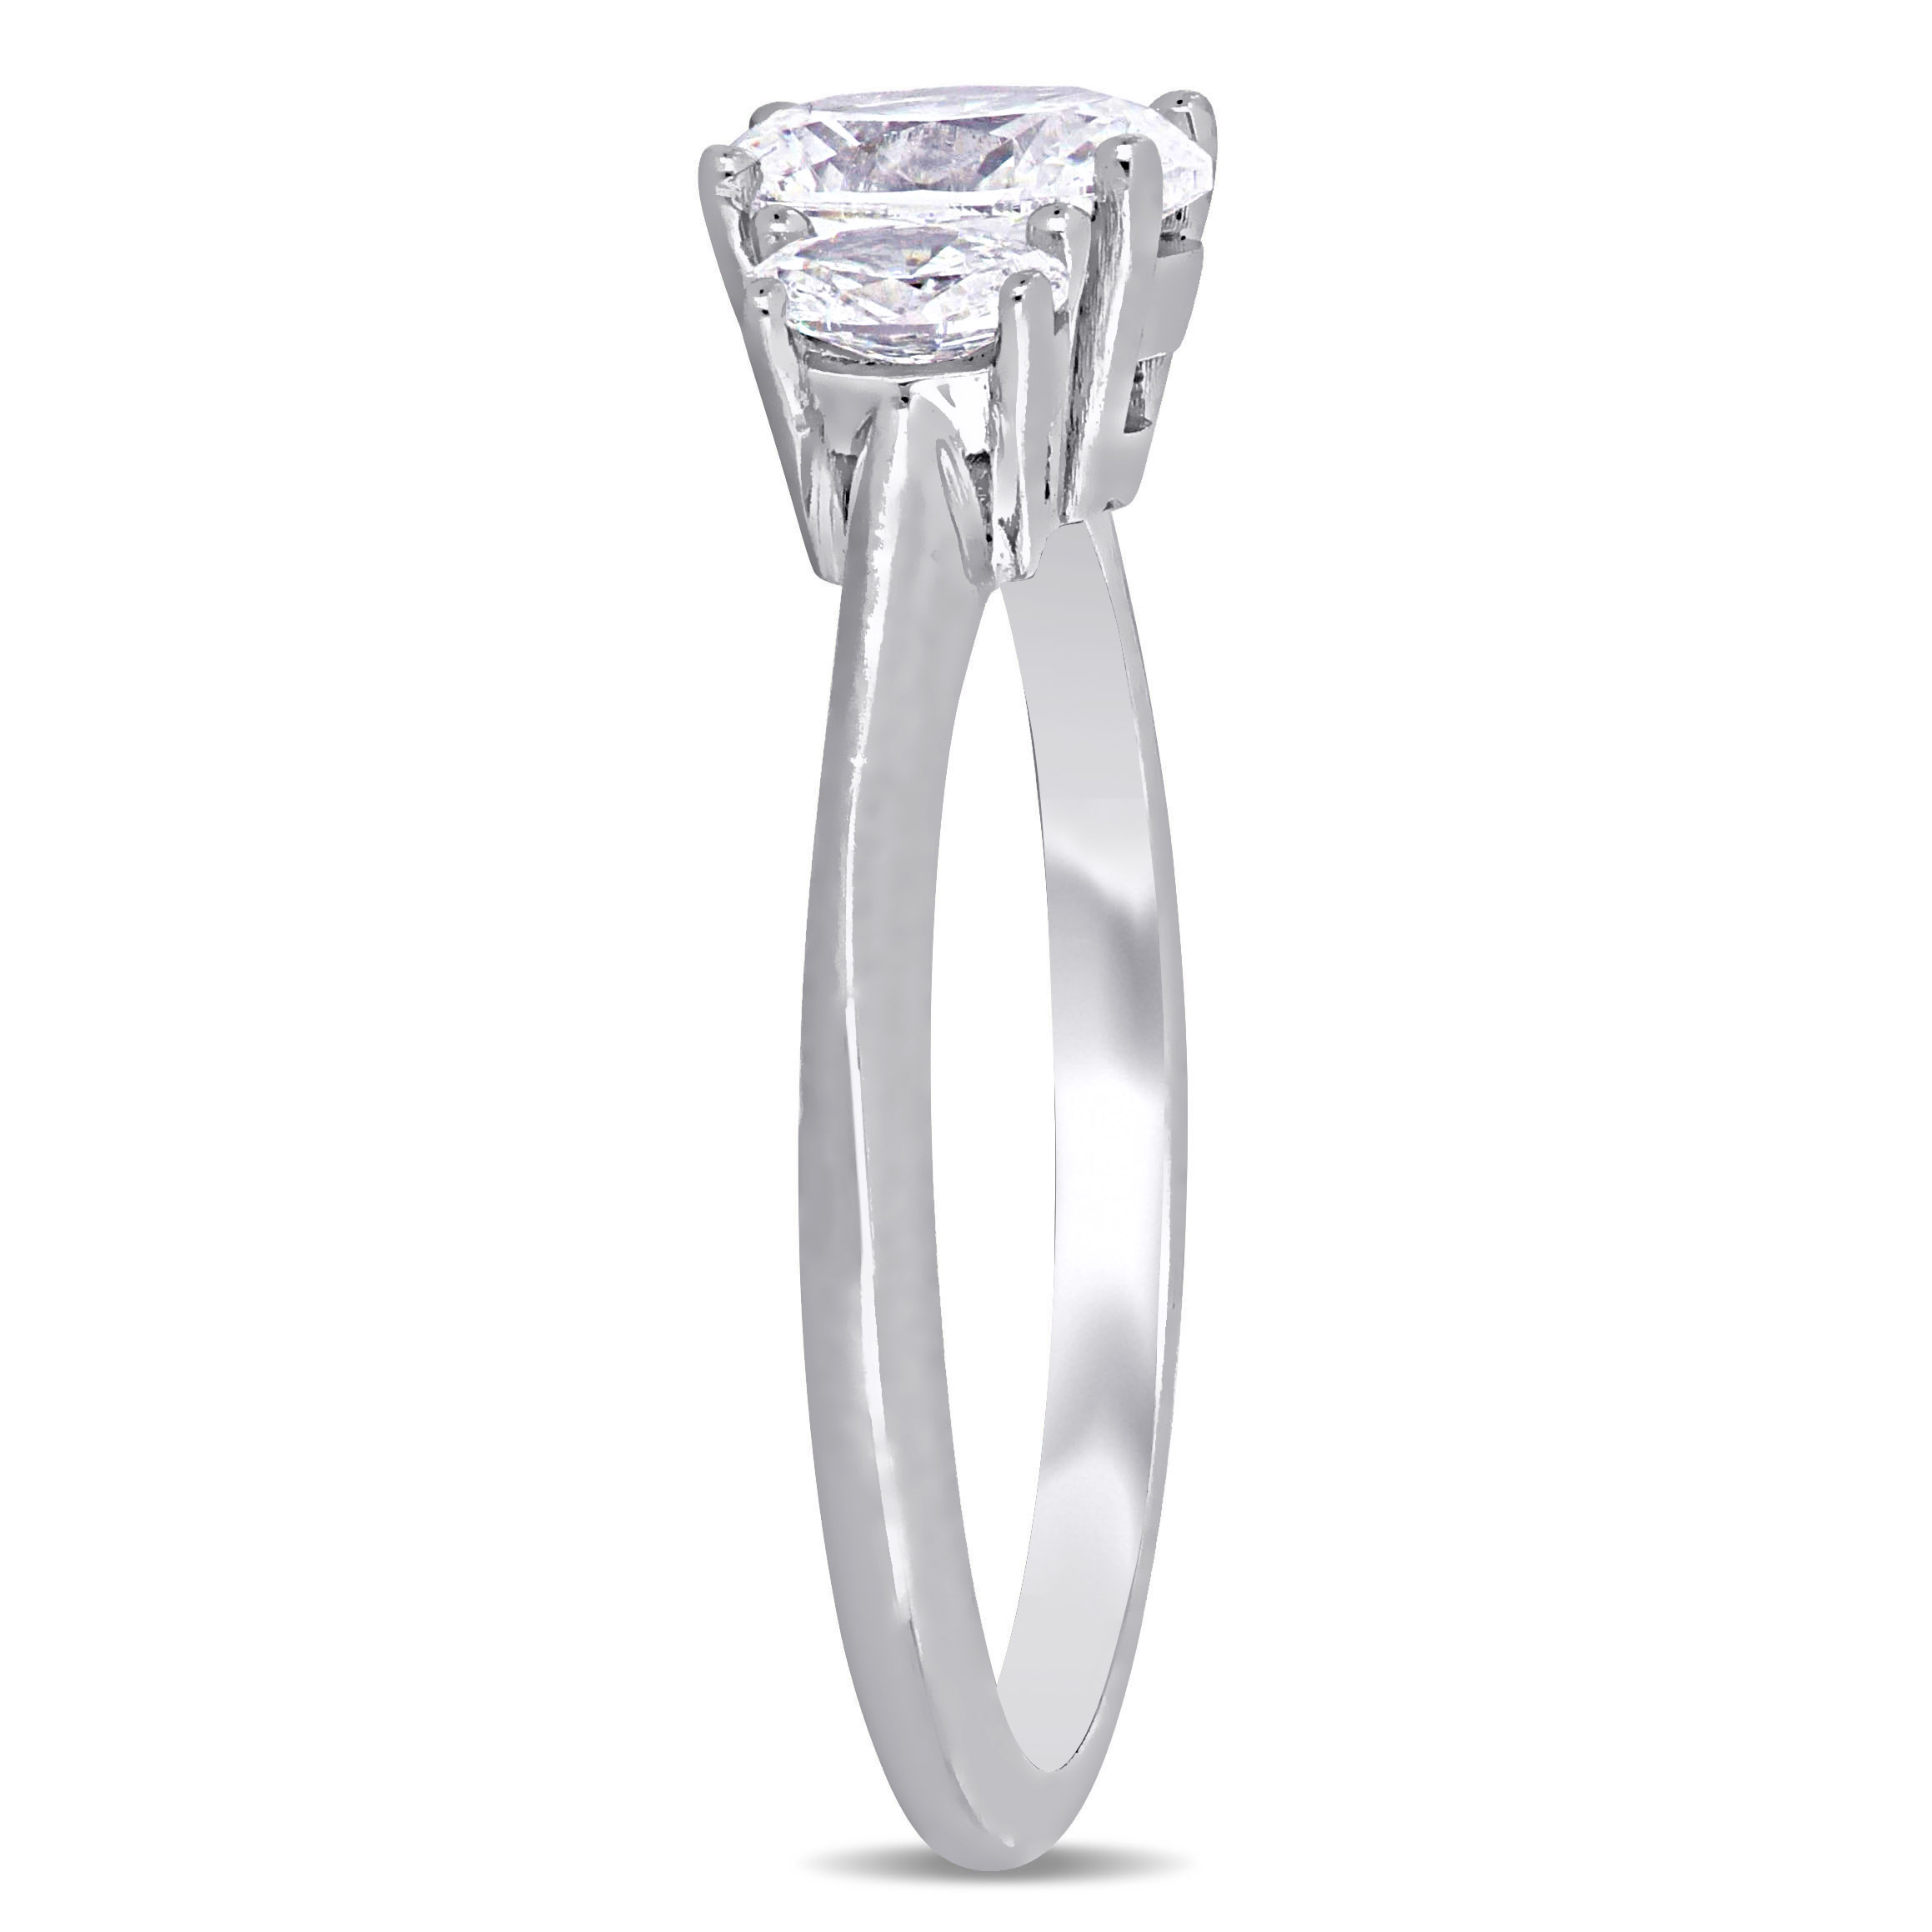 1 1/3 CT TW Certified Diamond 3-Stone Engagement Ring in 18k White Gold